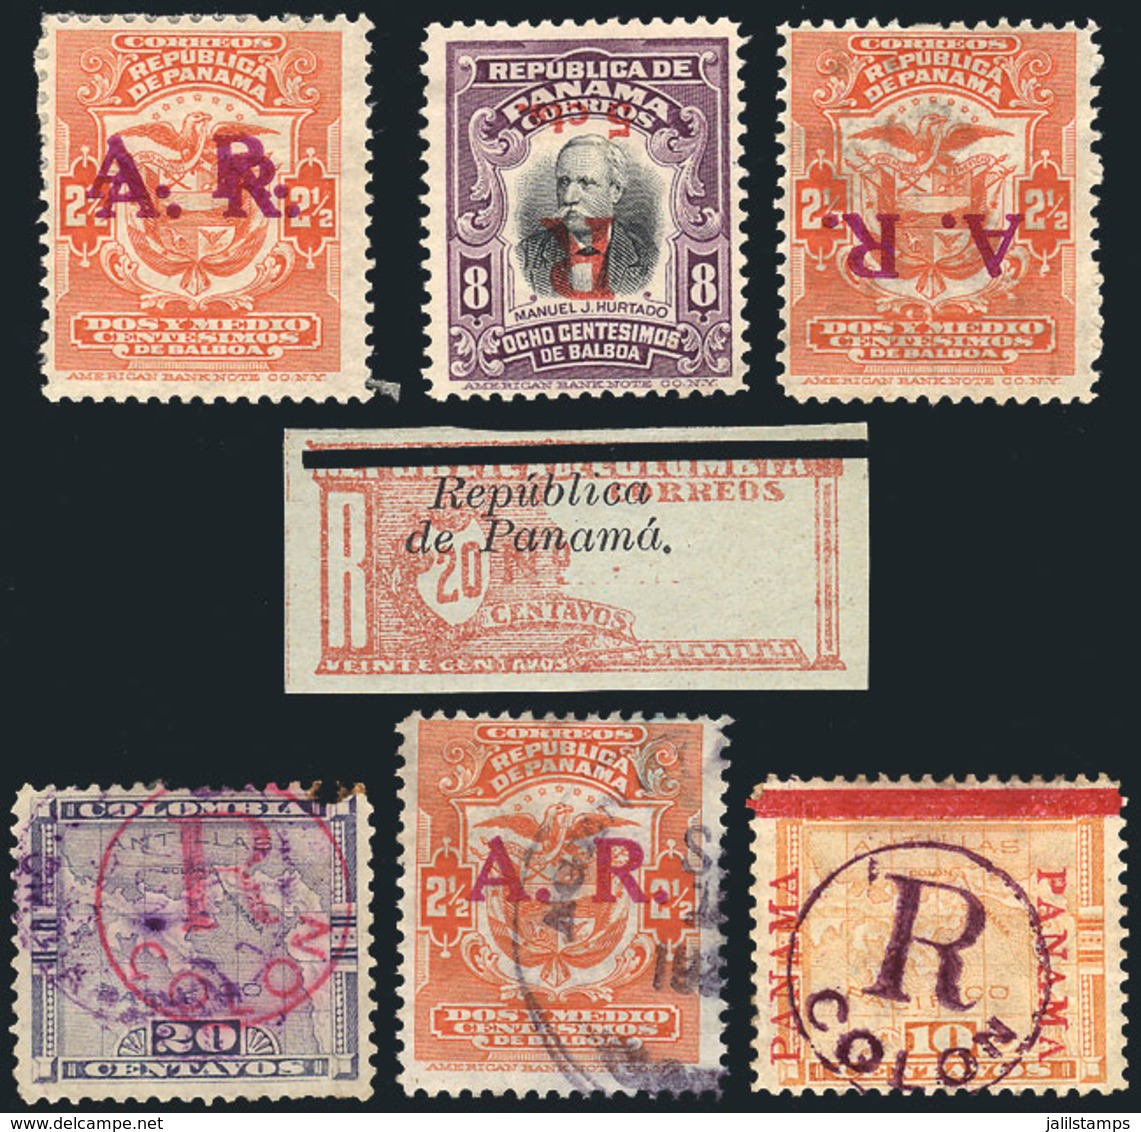 PANAMA: Interesting Lot Of Old Stamps, Some With Varieties, Fine General Quality! - Panama